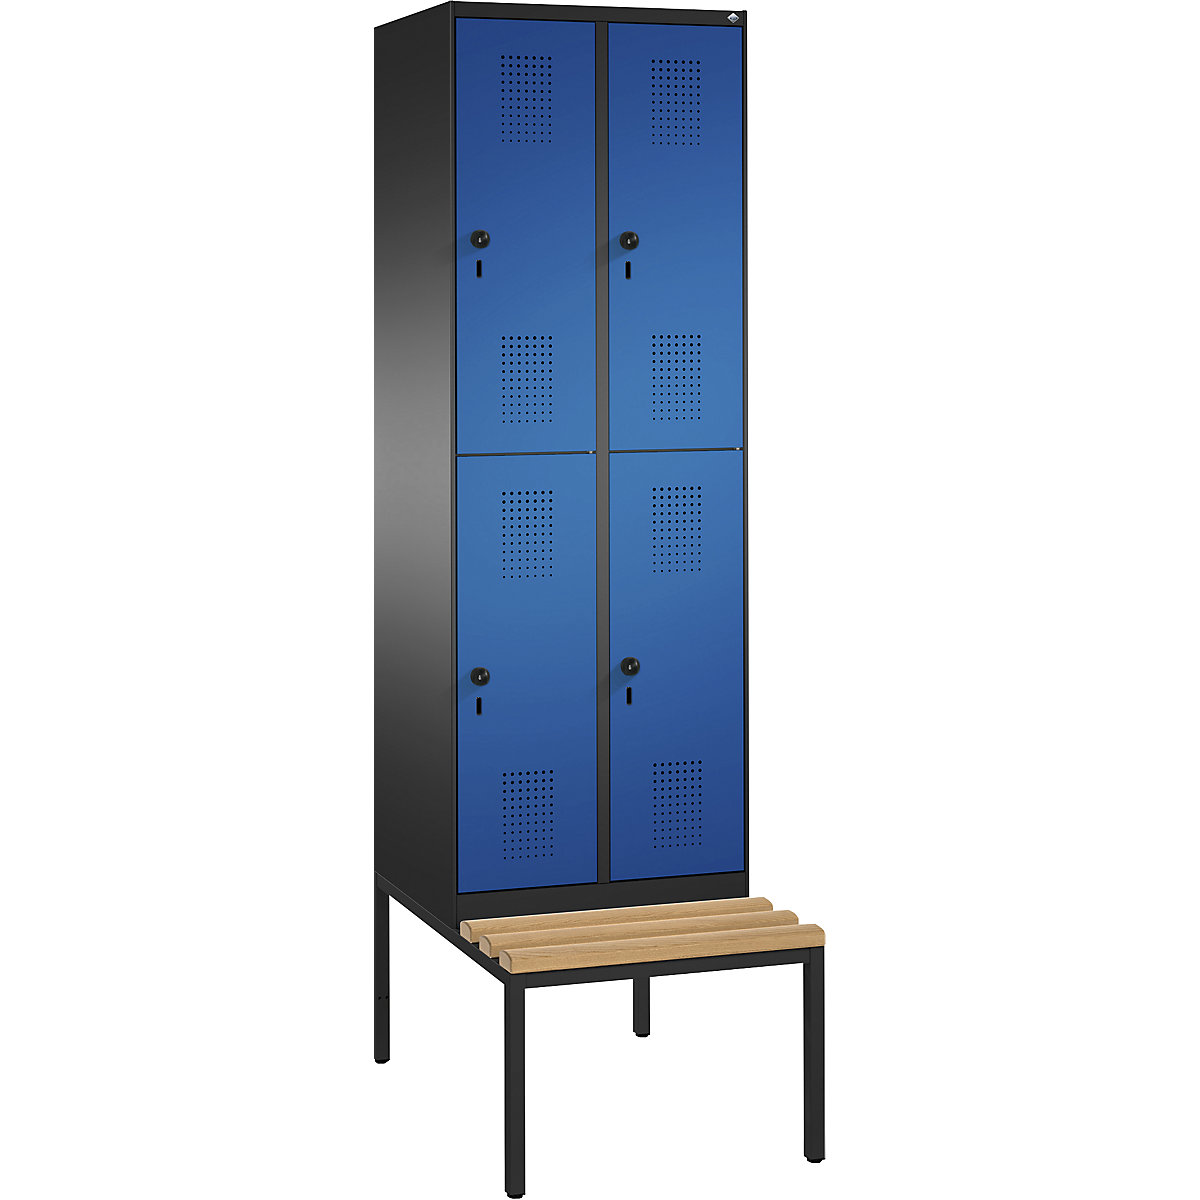 EVOLO cloakroom locker, double tier, with bench – C+P, 2 compartments, 2 shelf compartments each, compartment width 300 mm, black grey / gentian blue-16